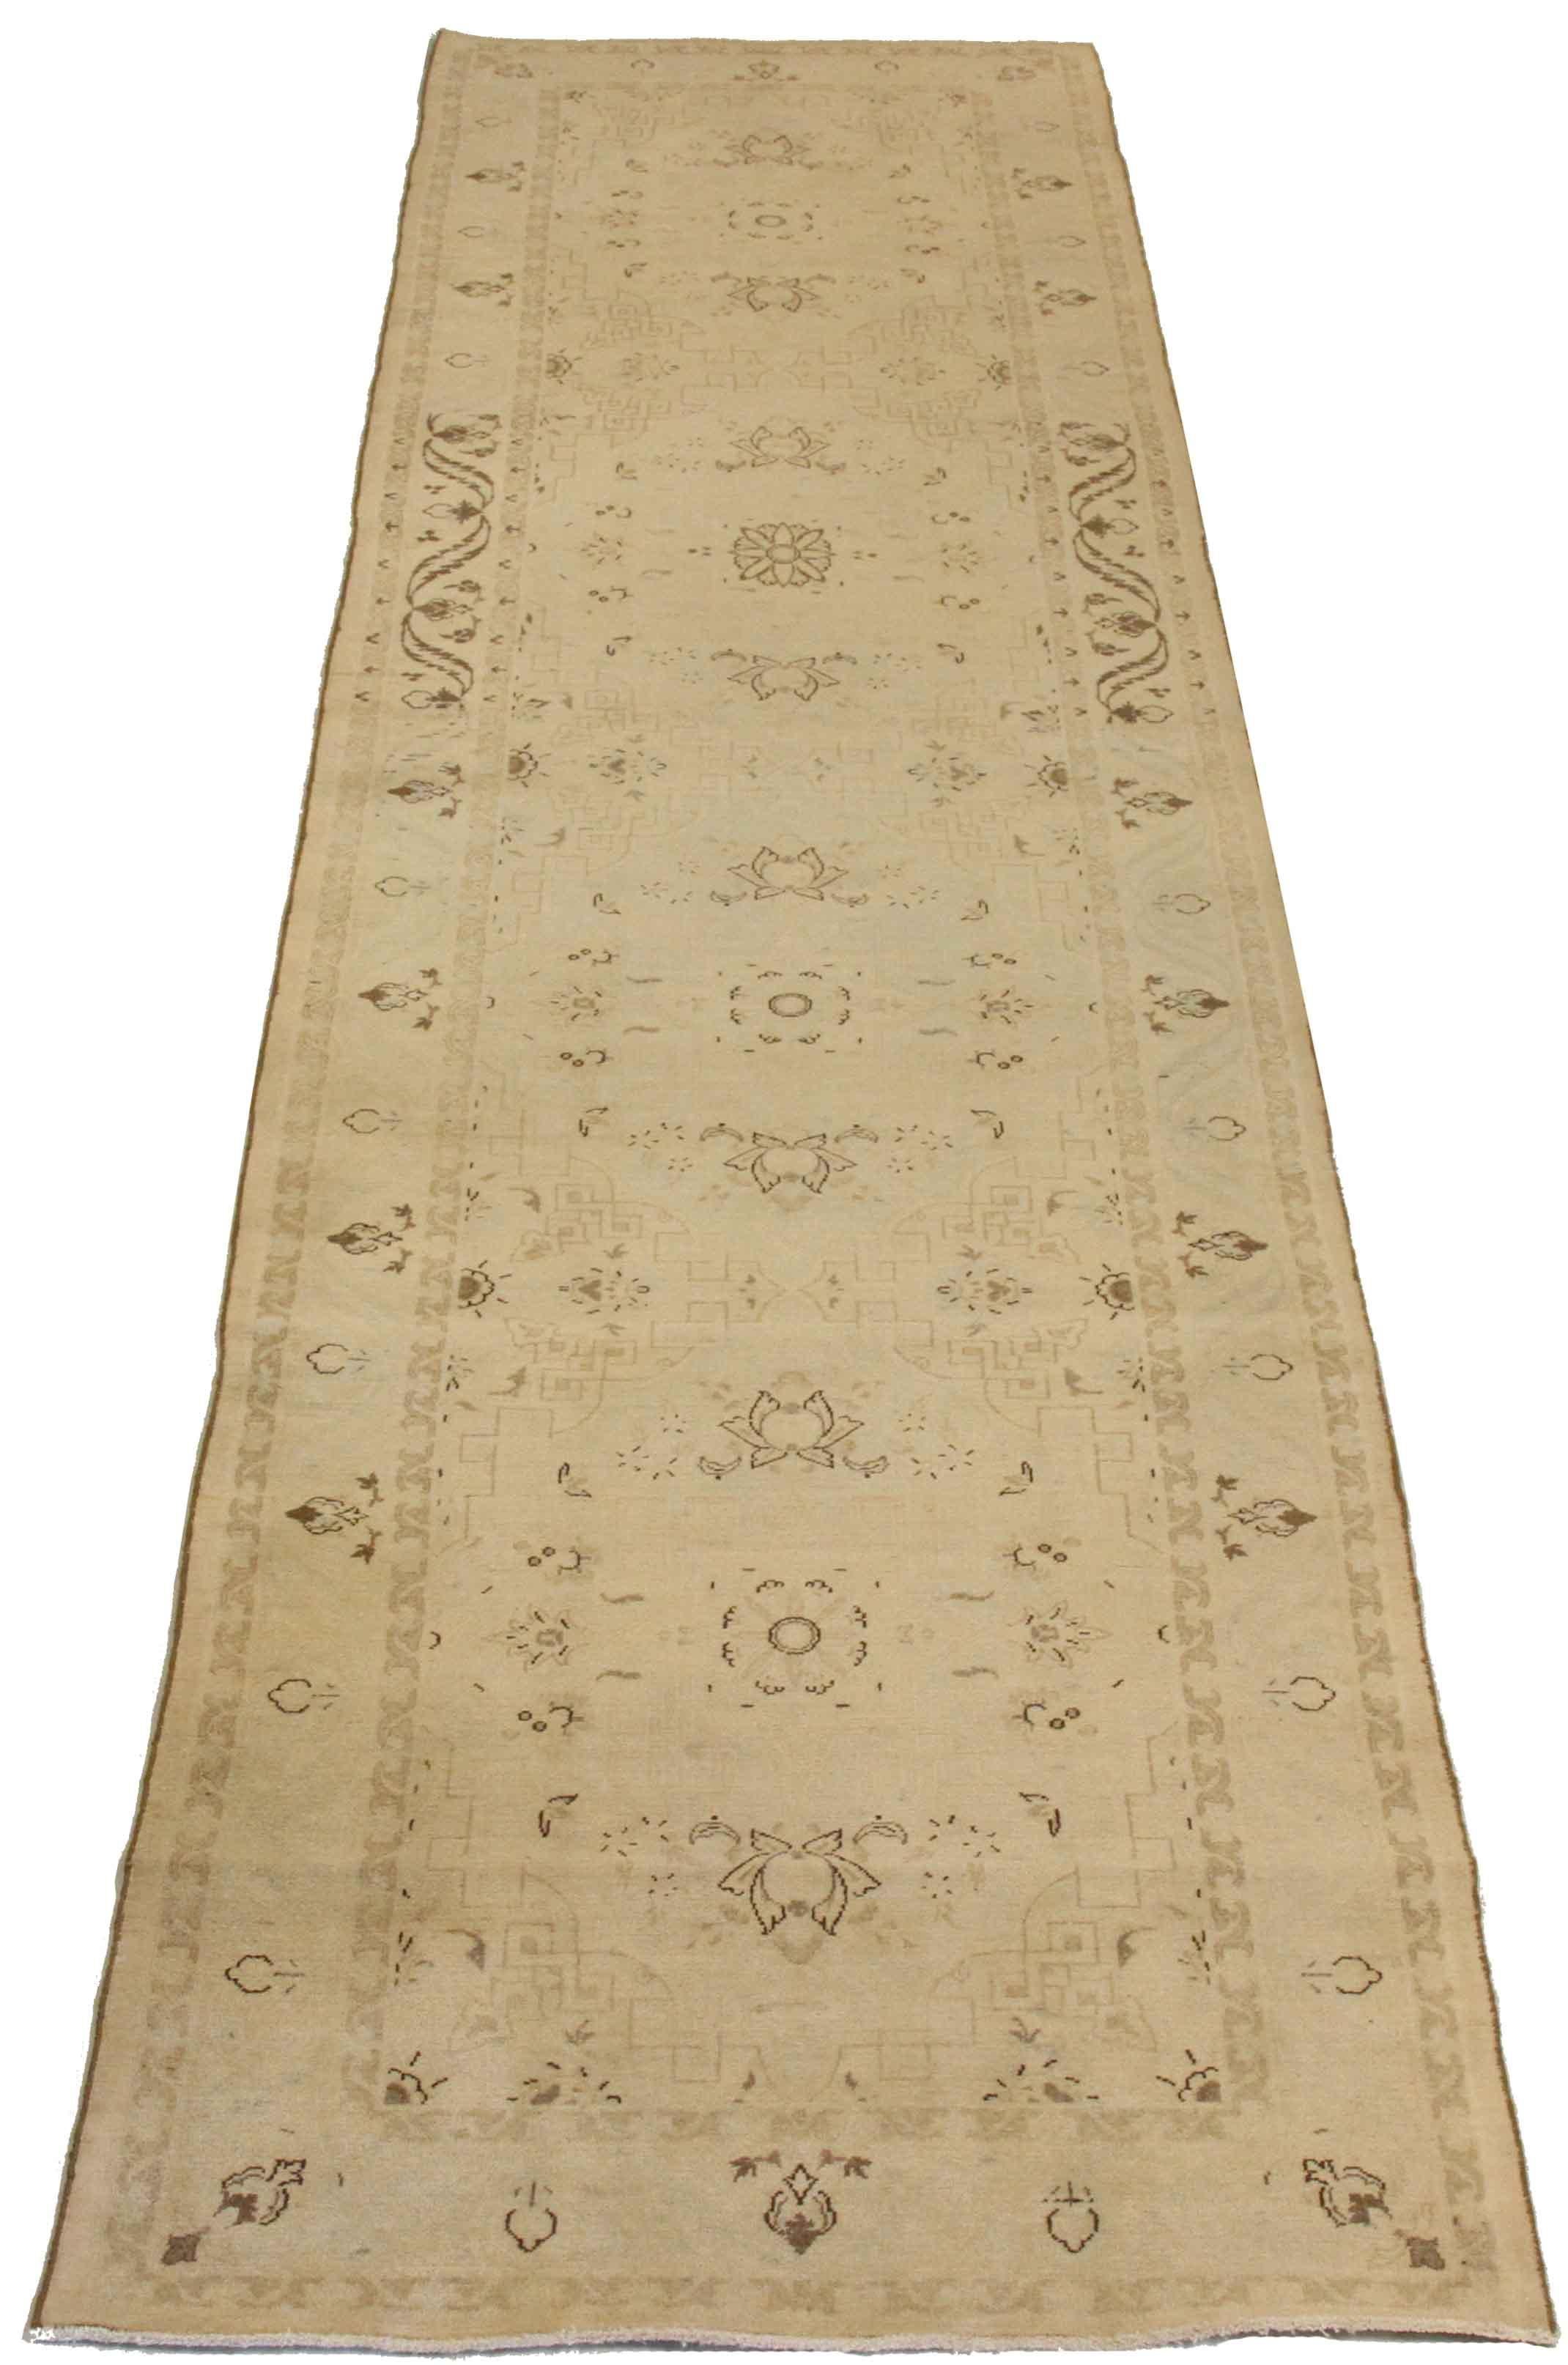 Antique mid-20th century hand-woven Persian runner rug made from fine wool and all-natural vegetable dyes that are safe for people and pets. It features traditional Tabriz weaving depicting intricate botanical and animal patterns often in bold